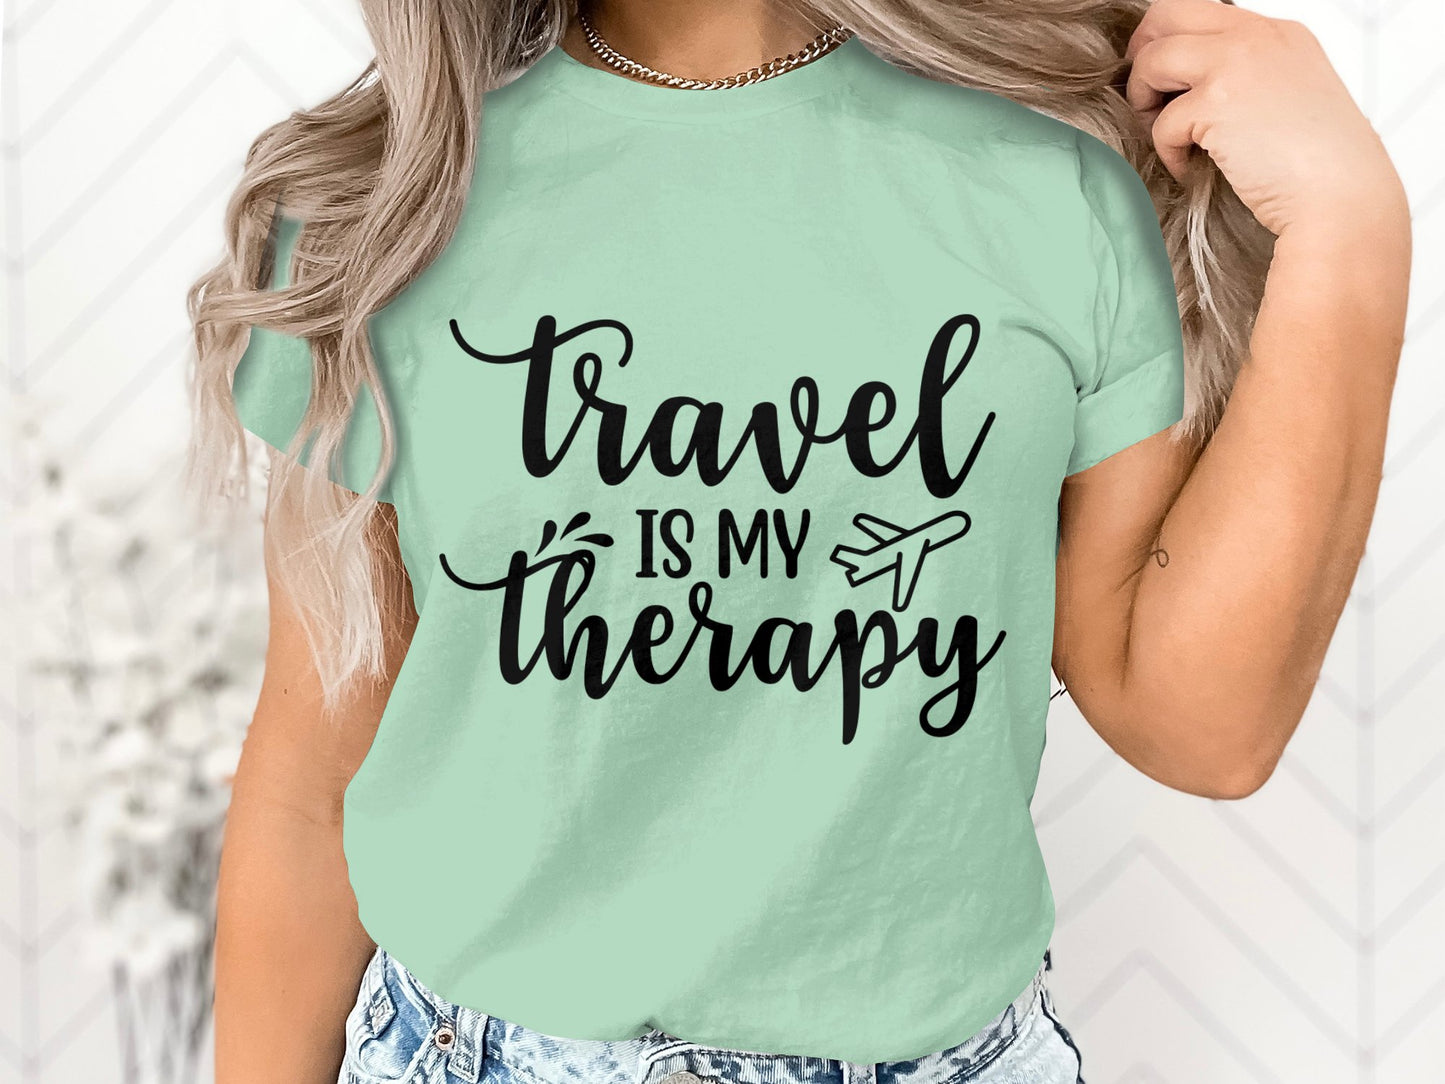 Travel is my Therapy T-Shirt